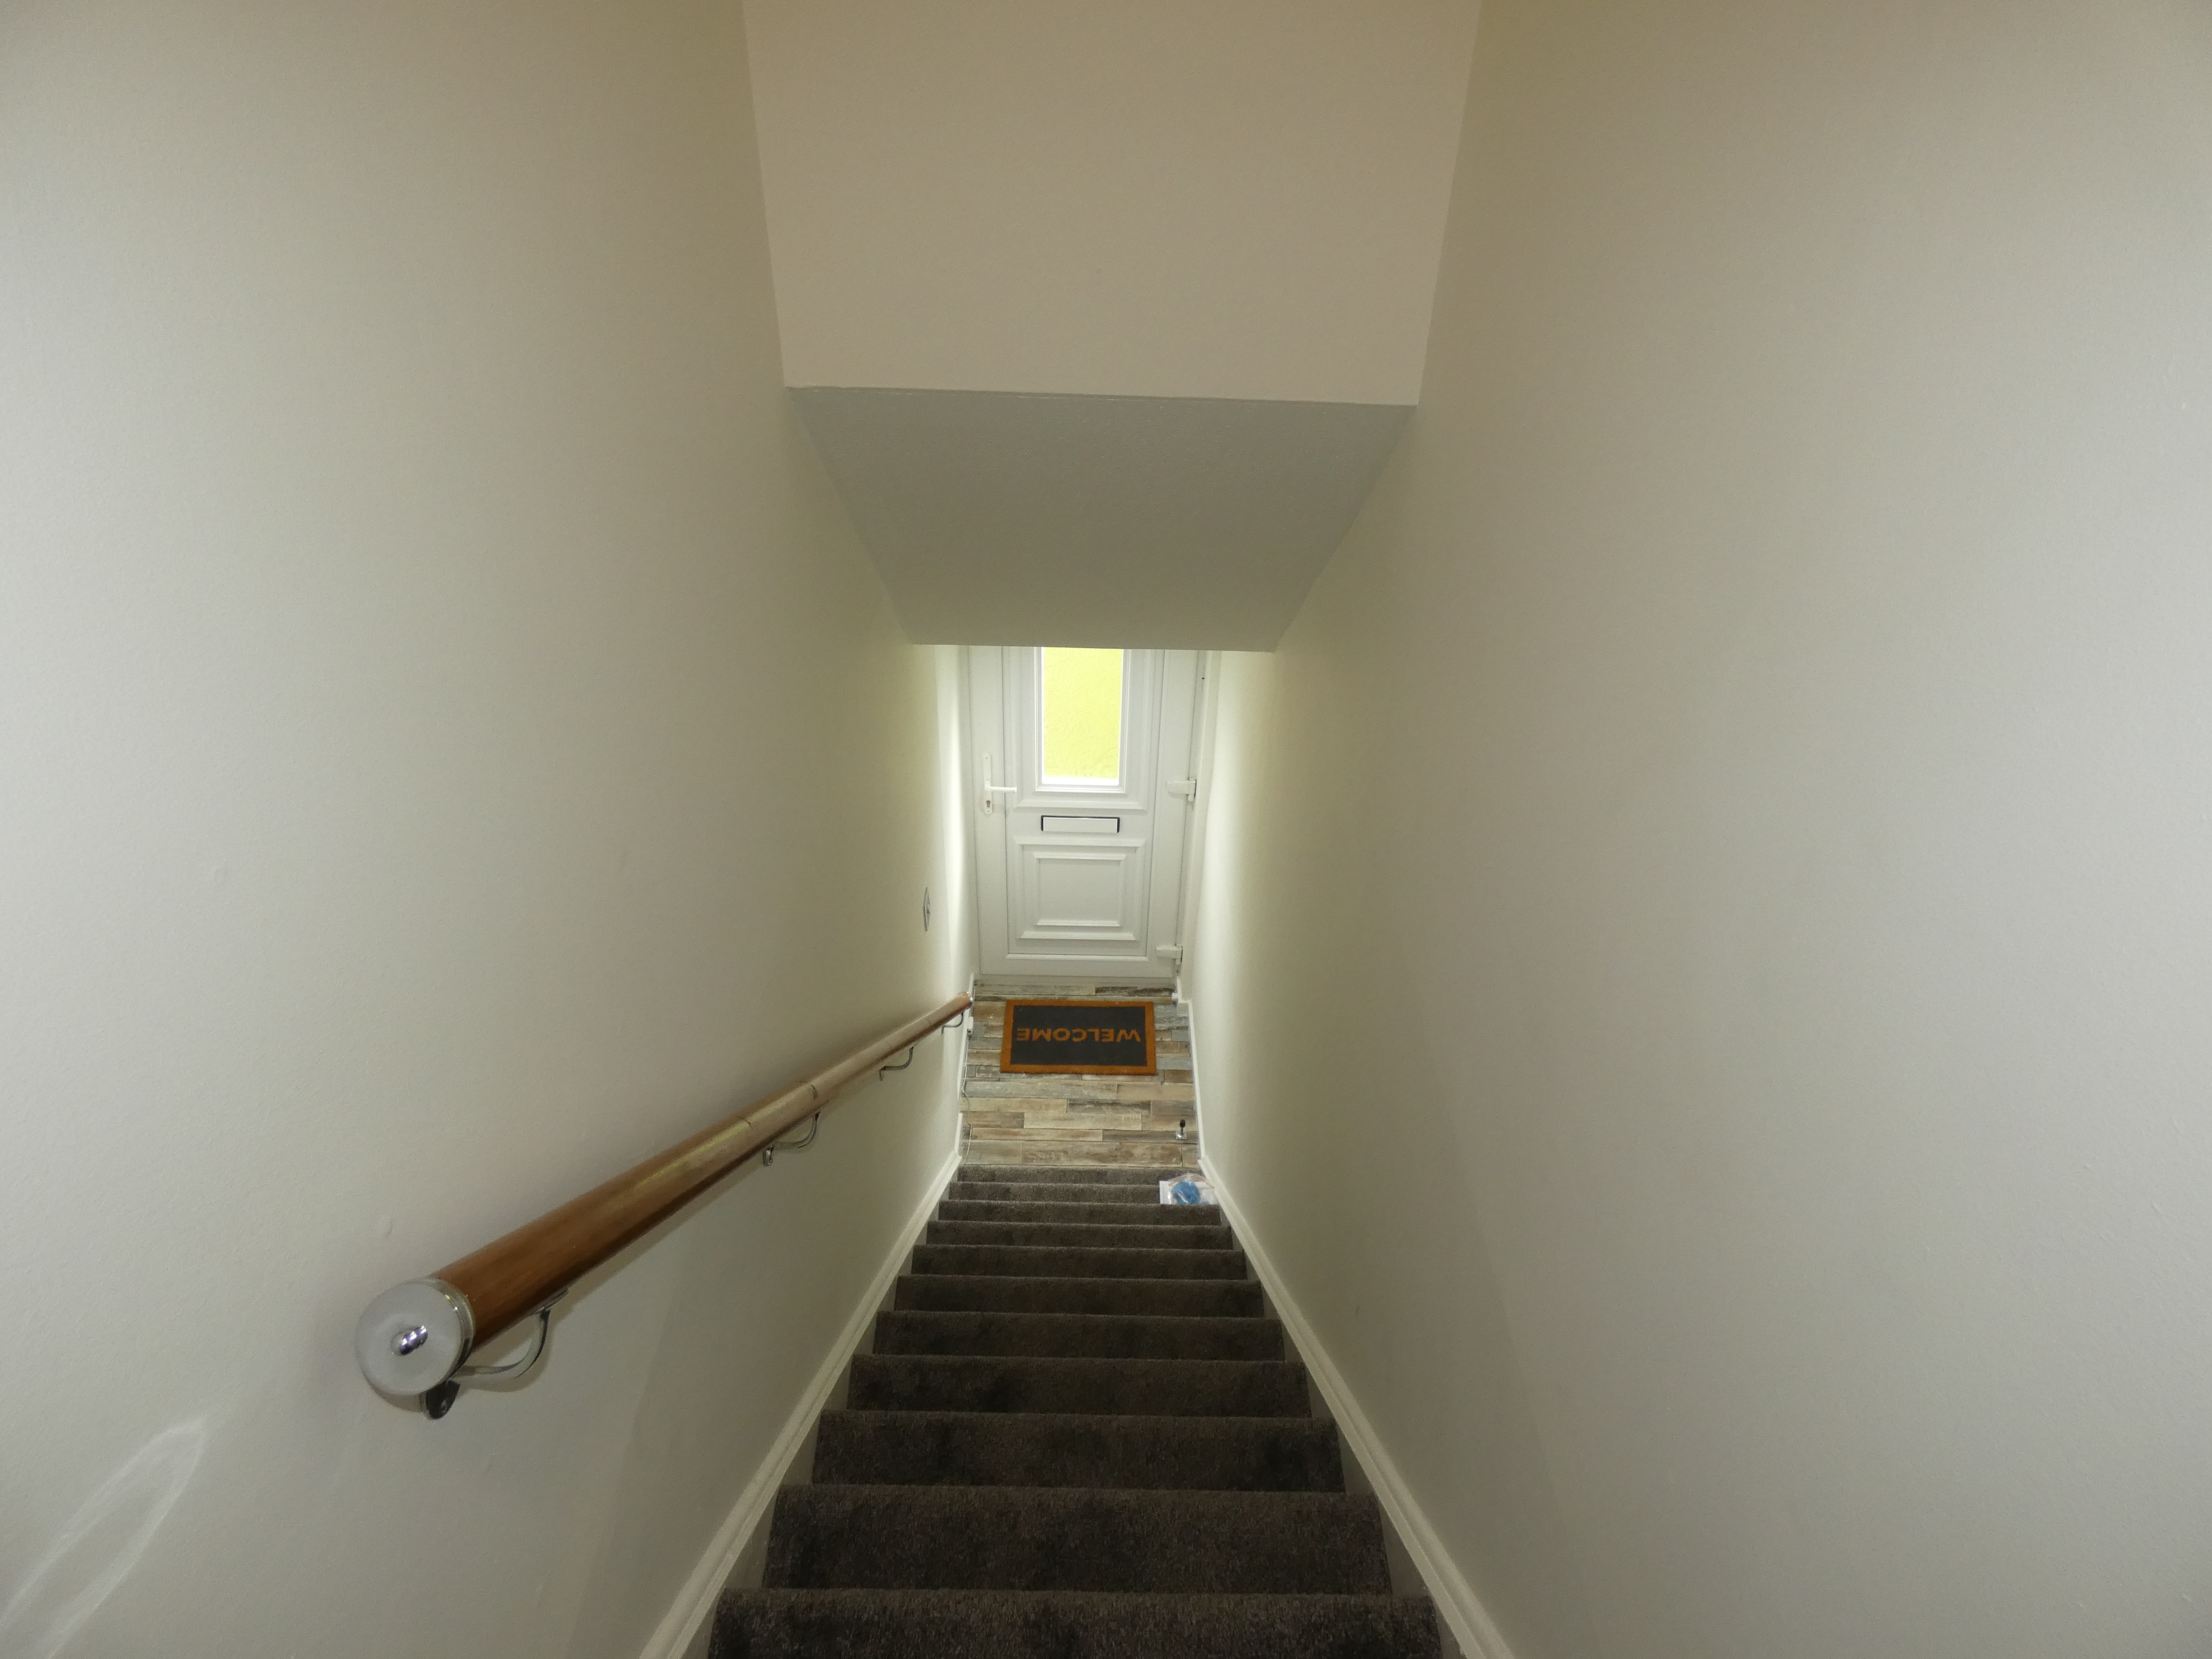 2 bed flat to rent in Wooler Green, Newcastle upon tyne  - Property Image 8